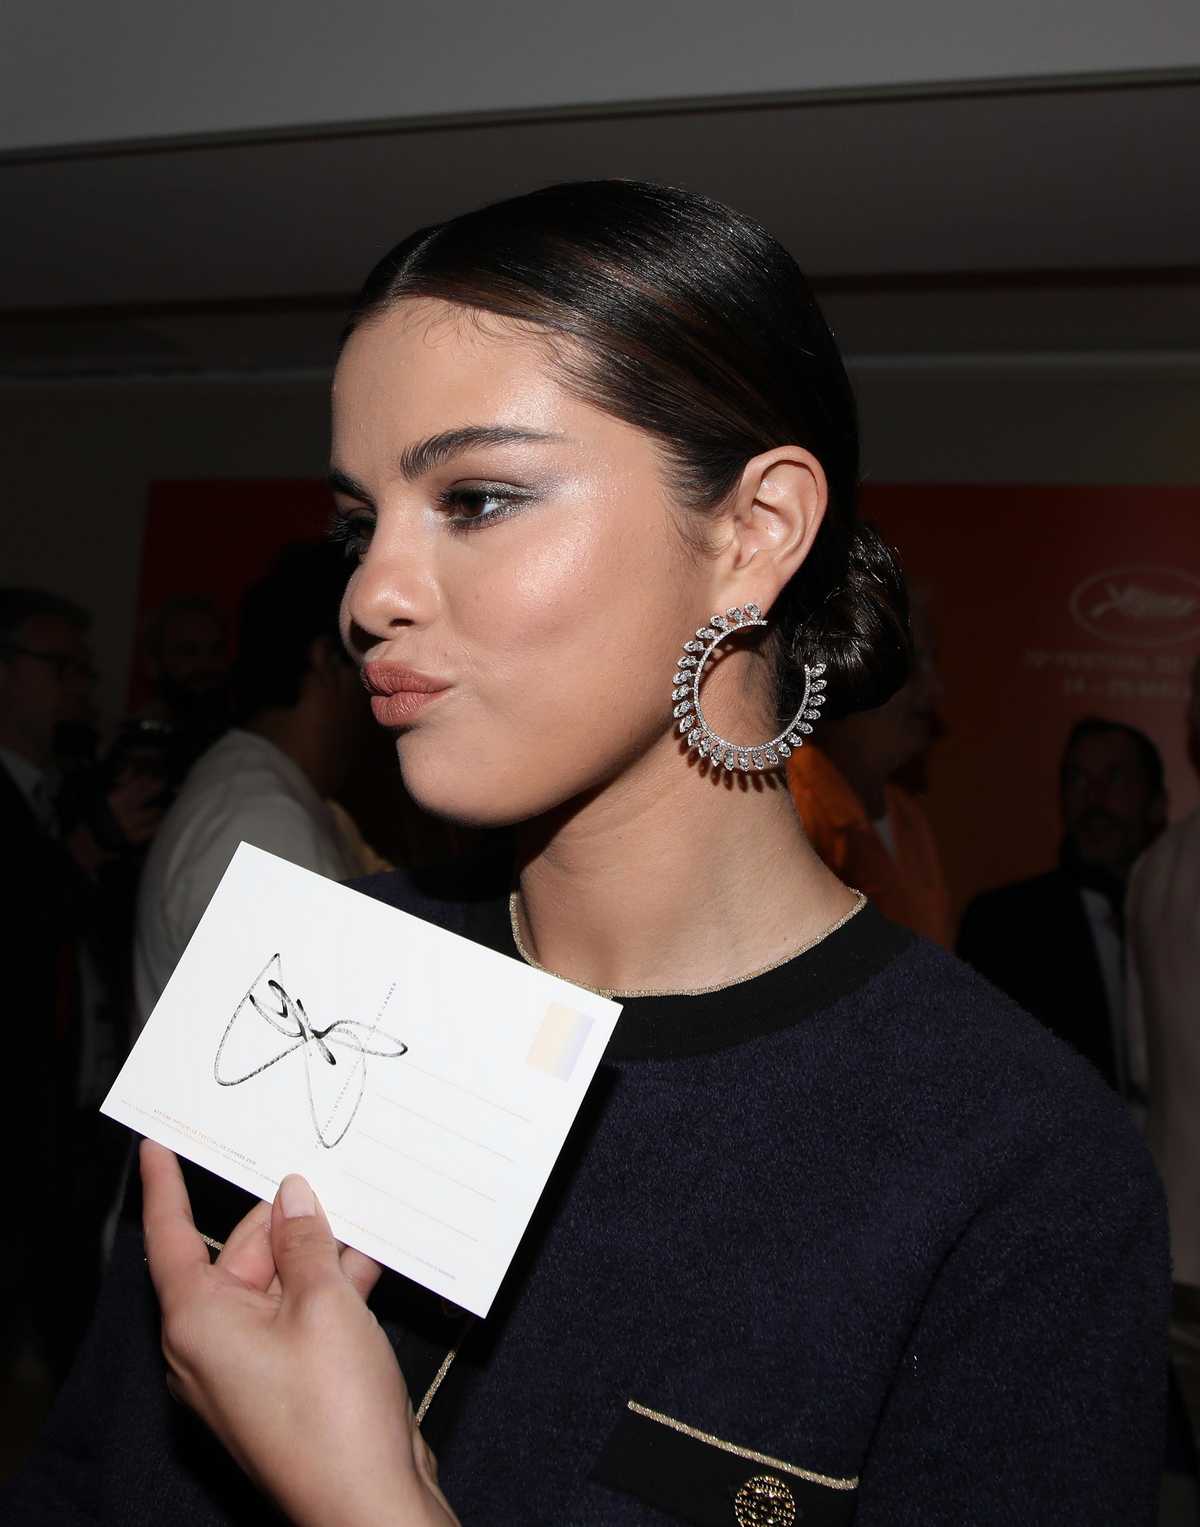 Selena_Gomez_-__The_Dead_Don_t_Die__press_conference_at_the_72nd_edition_of_the_Cannes_Film_Festival_05152019-21.jpg